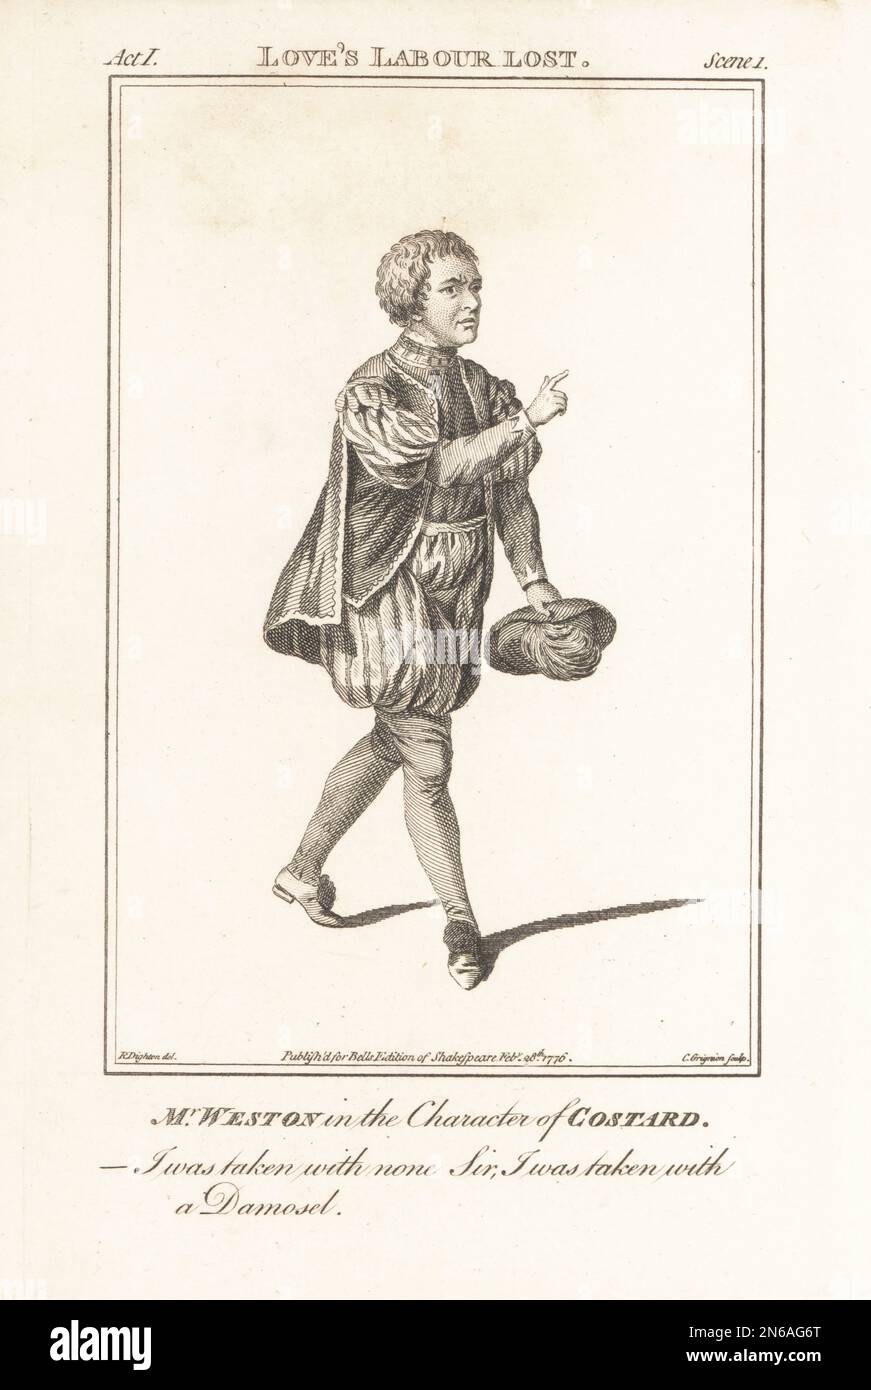 Mr Thomas Weston in the character of Costard in William Shakespeare's Love's Labour Lost. In doublet with puffed sleeves, breeches, short cloak, holding a plumed cap. Weston did not play this role. Thomas Weston, acclaimed English comic actor, died of alcoholism, 1737–1776. Copperplate engraving by Charles Grignion after a portrait by James Roberts from John Bell's Edition of Shakespeare, London, Feb. 28th, 1776. Stock Photo